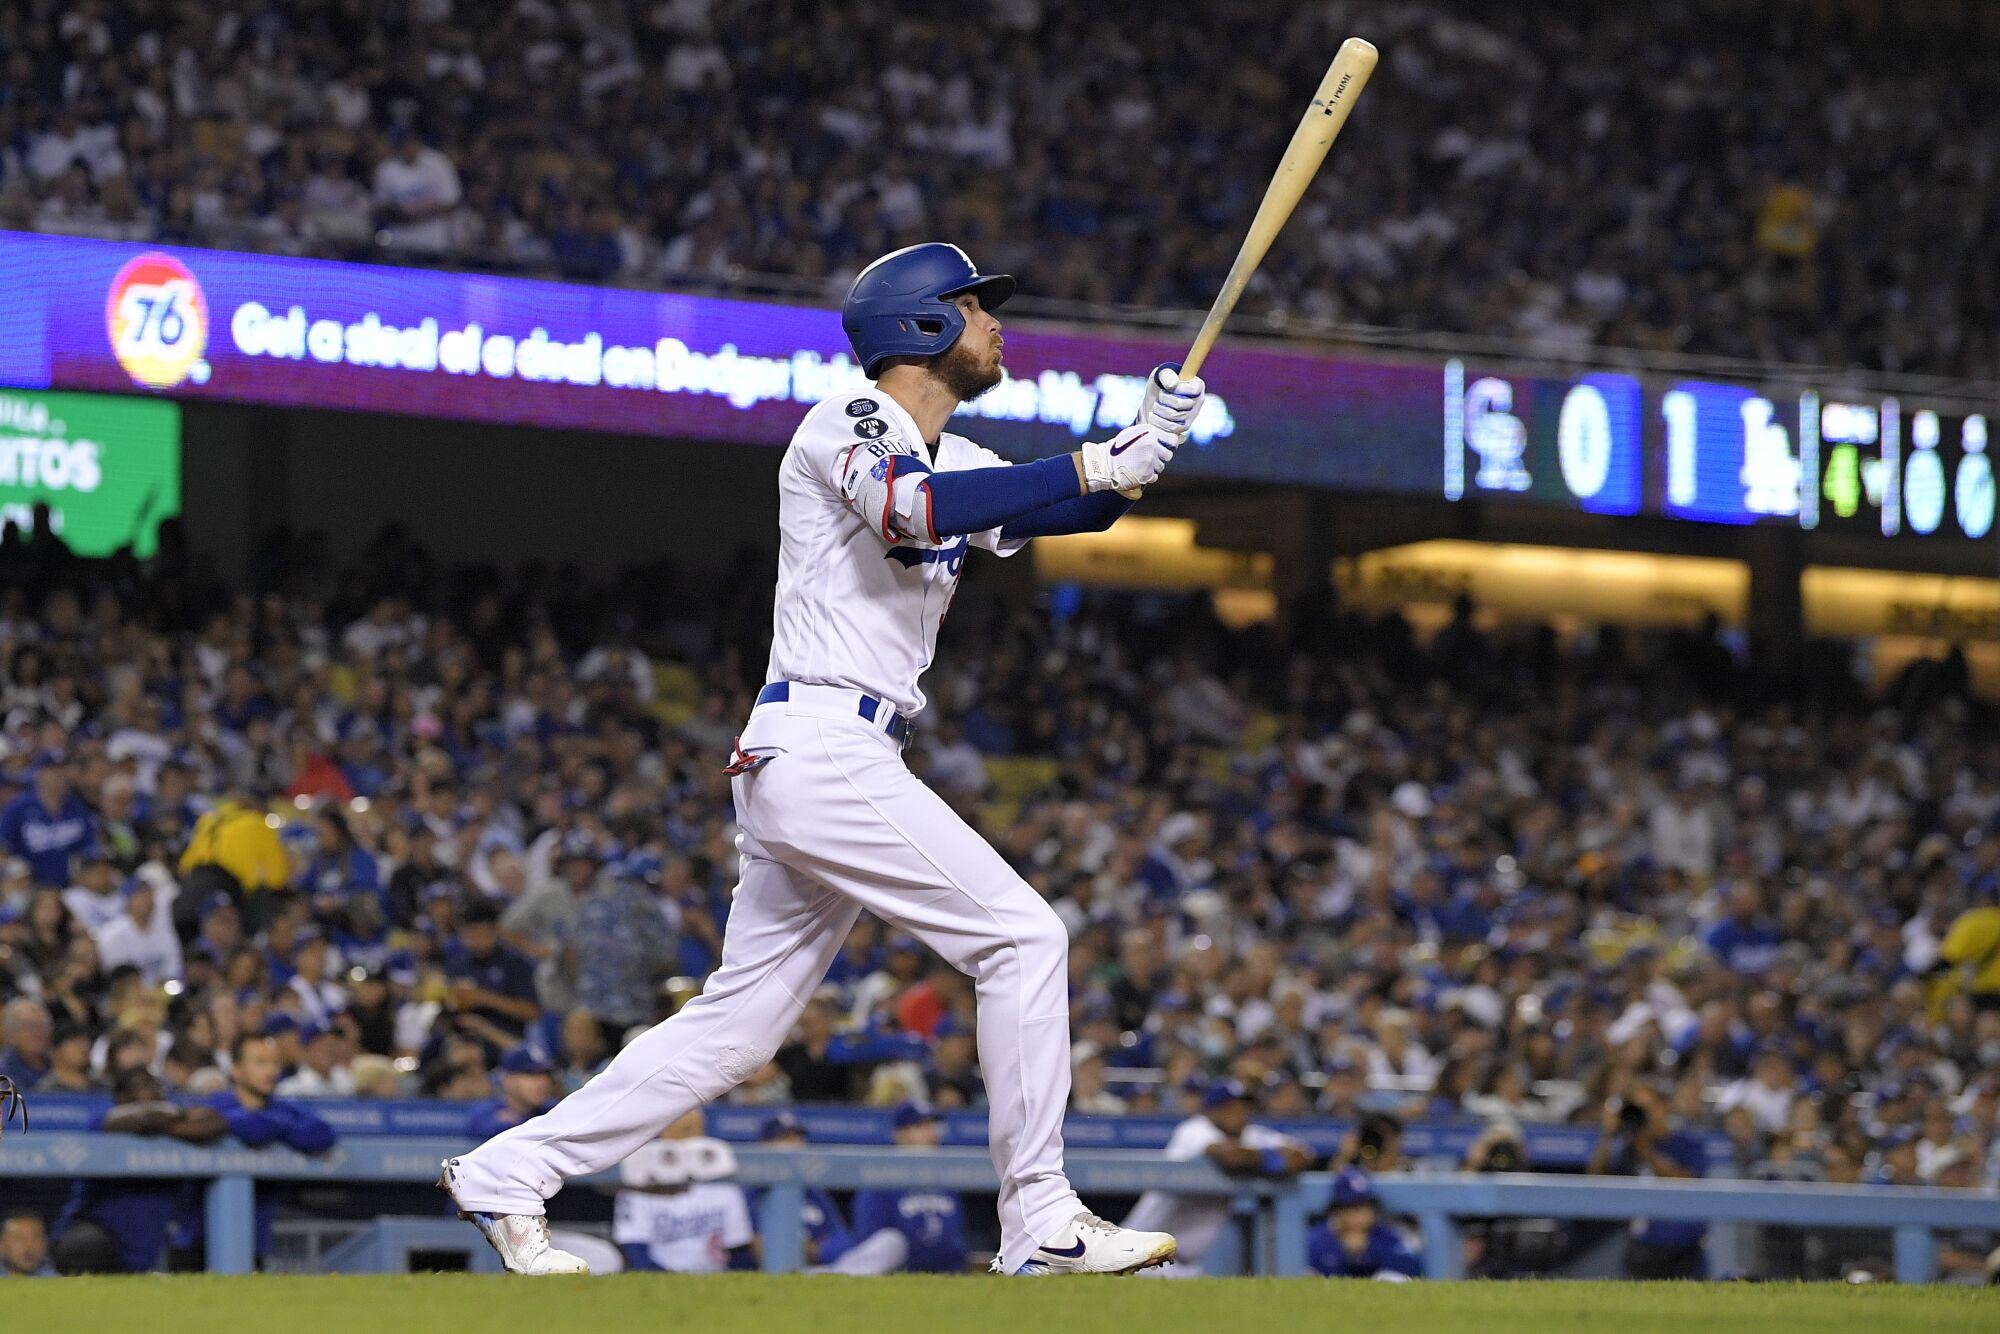 Cody Bellinger hits a three-run home run for the Dodgers against the Colorado Rocikes on Sept. 30, 2022.